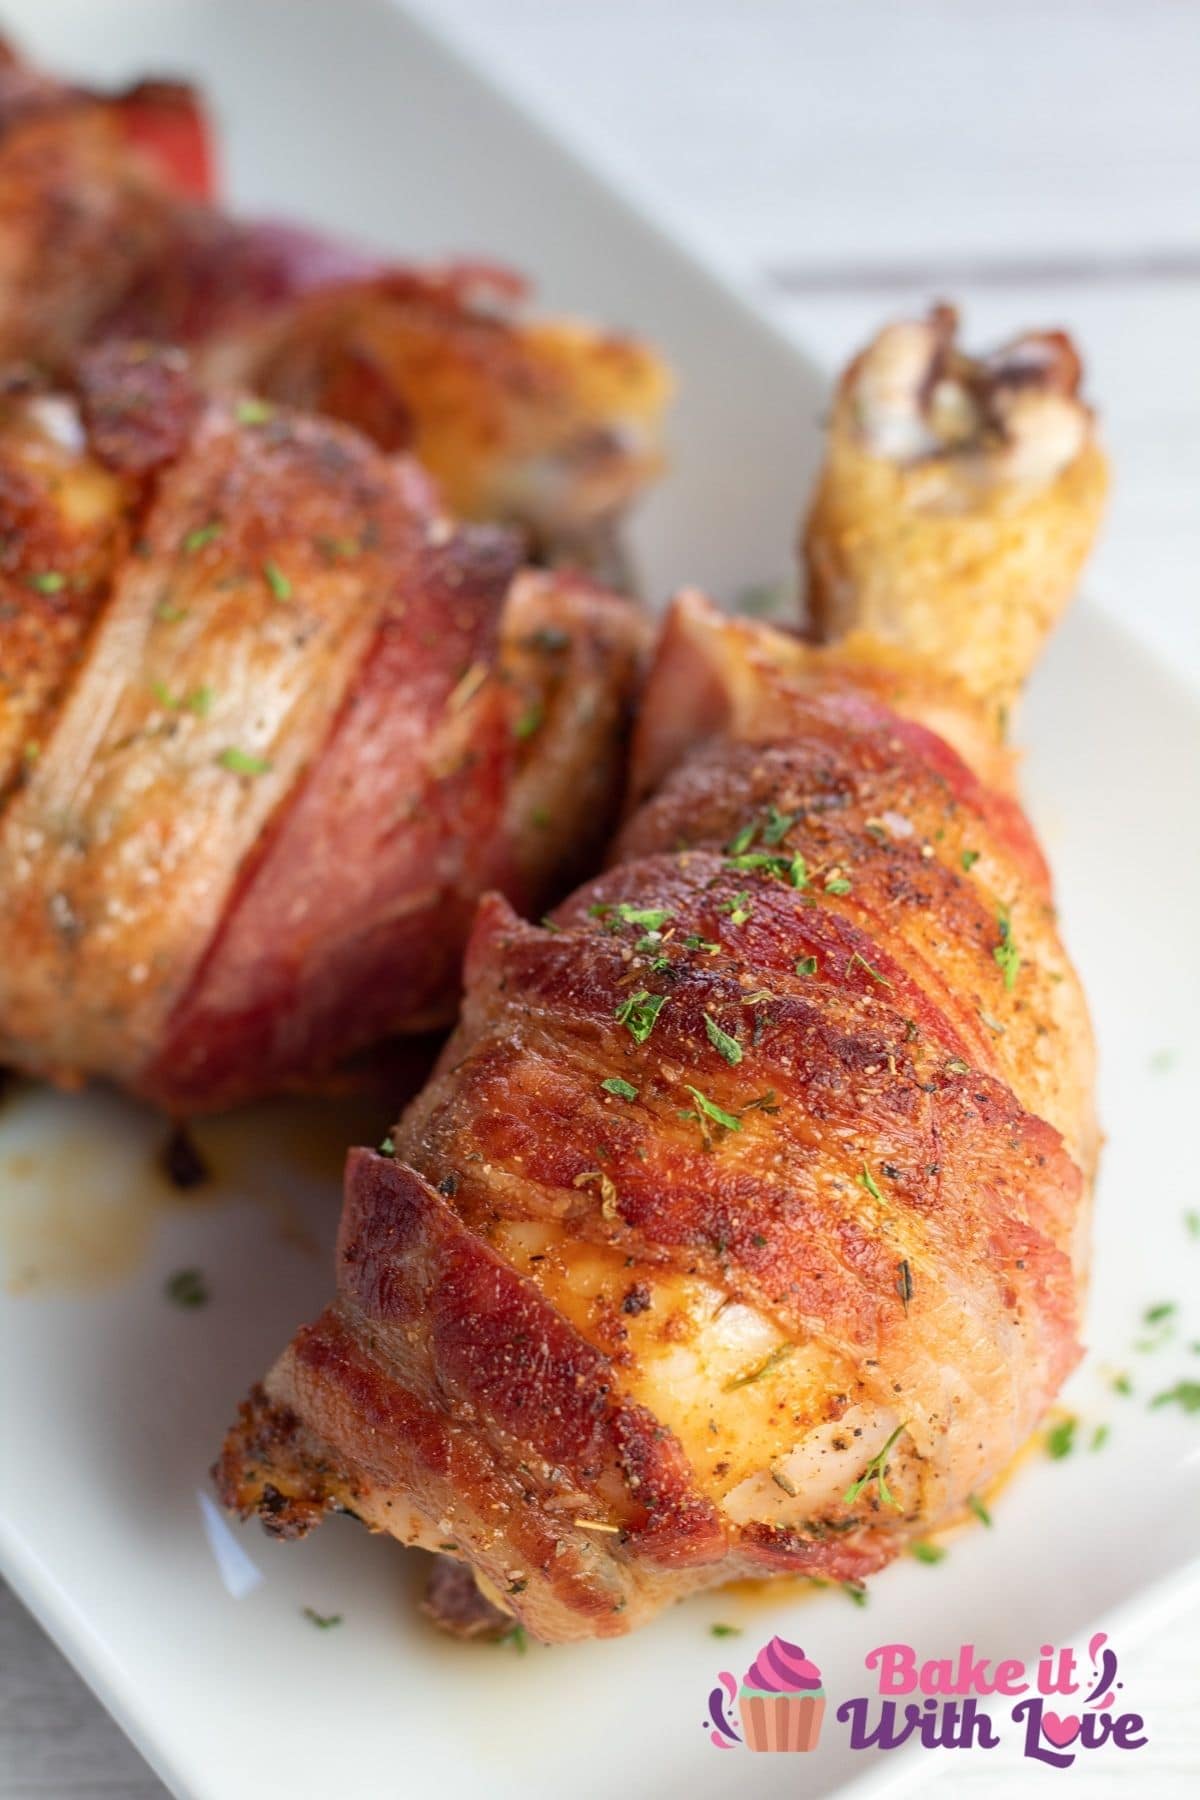 Tall closeup on a bacon wrapped baked chicken drumstick.